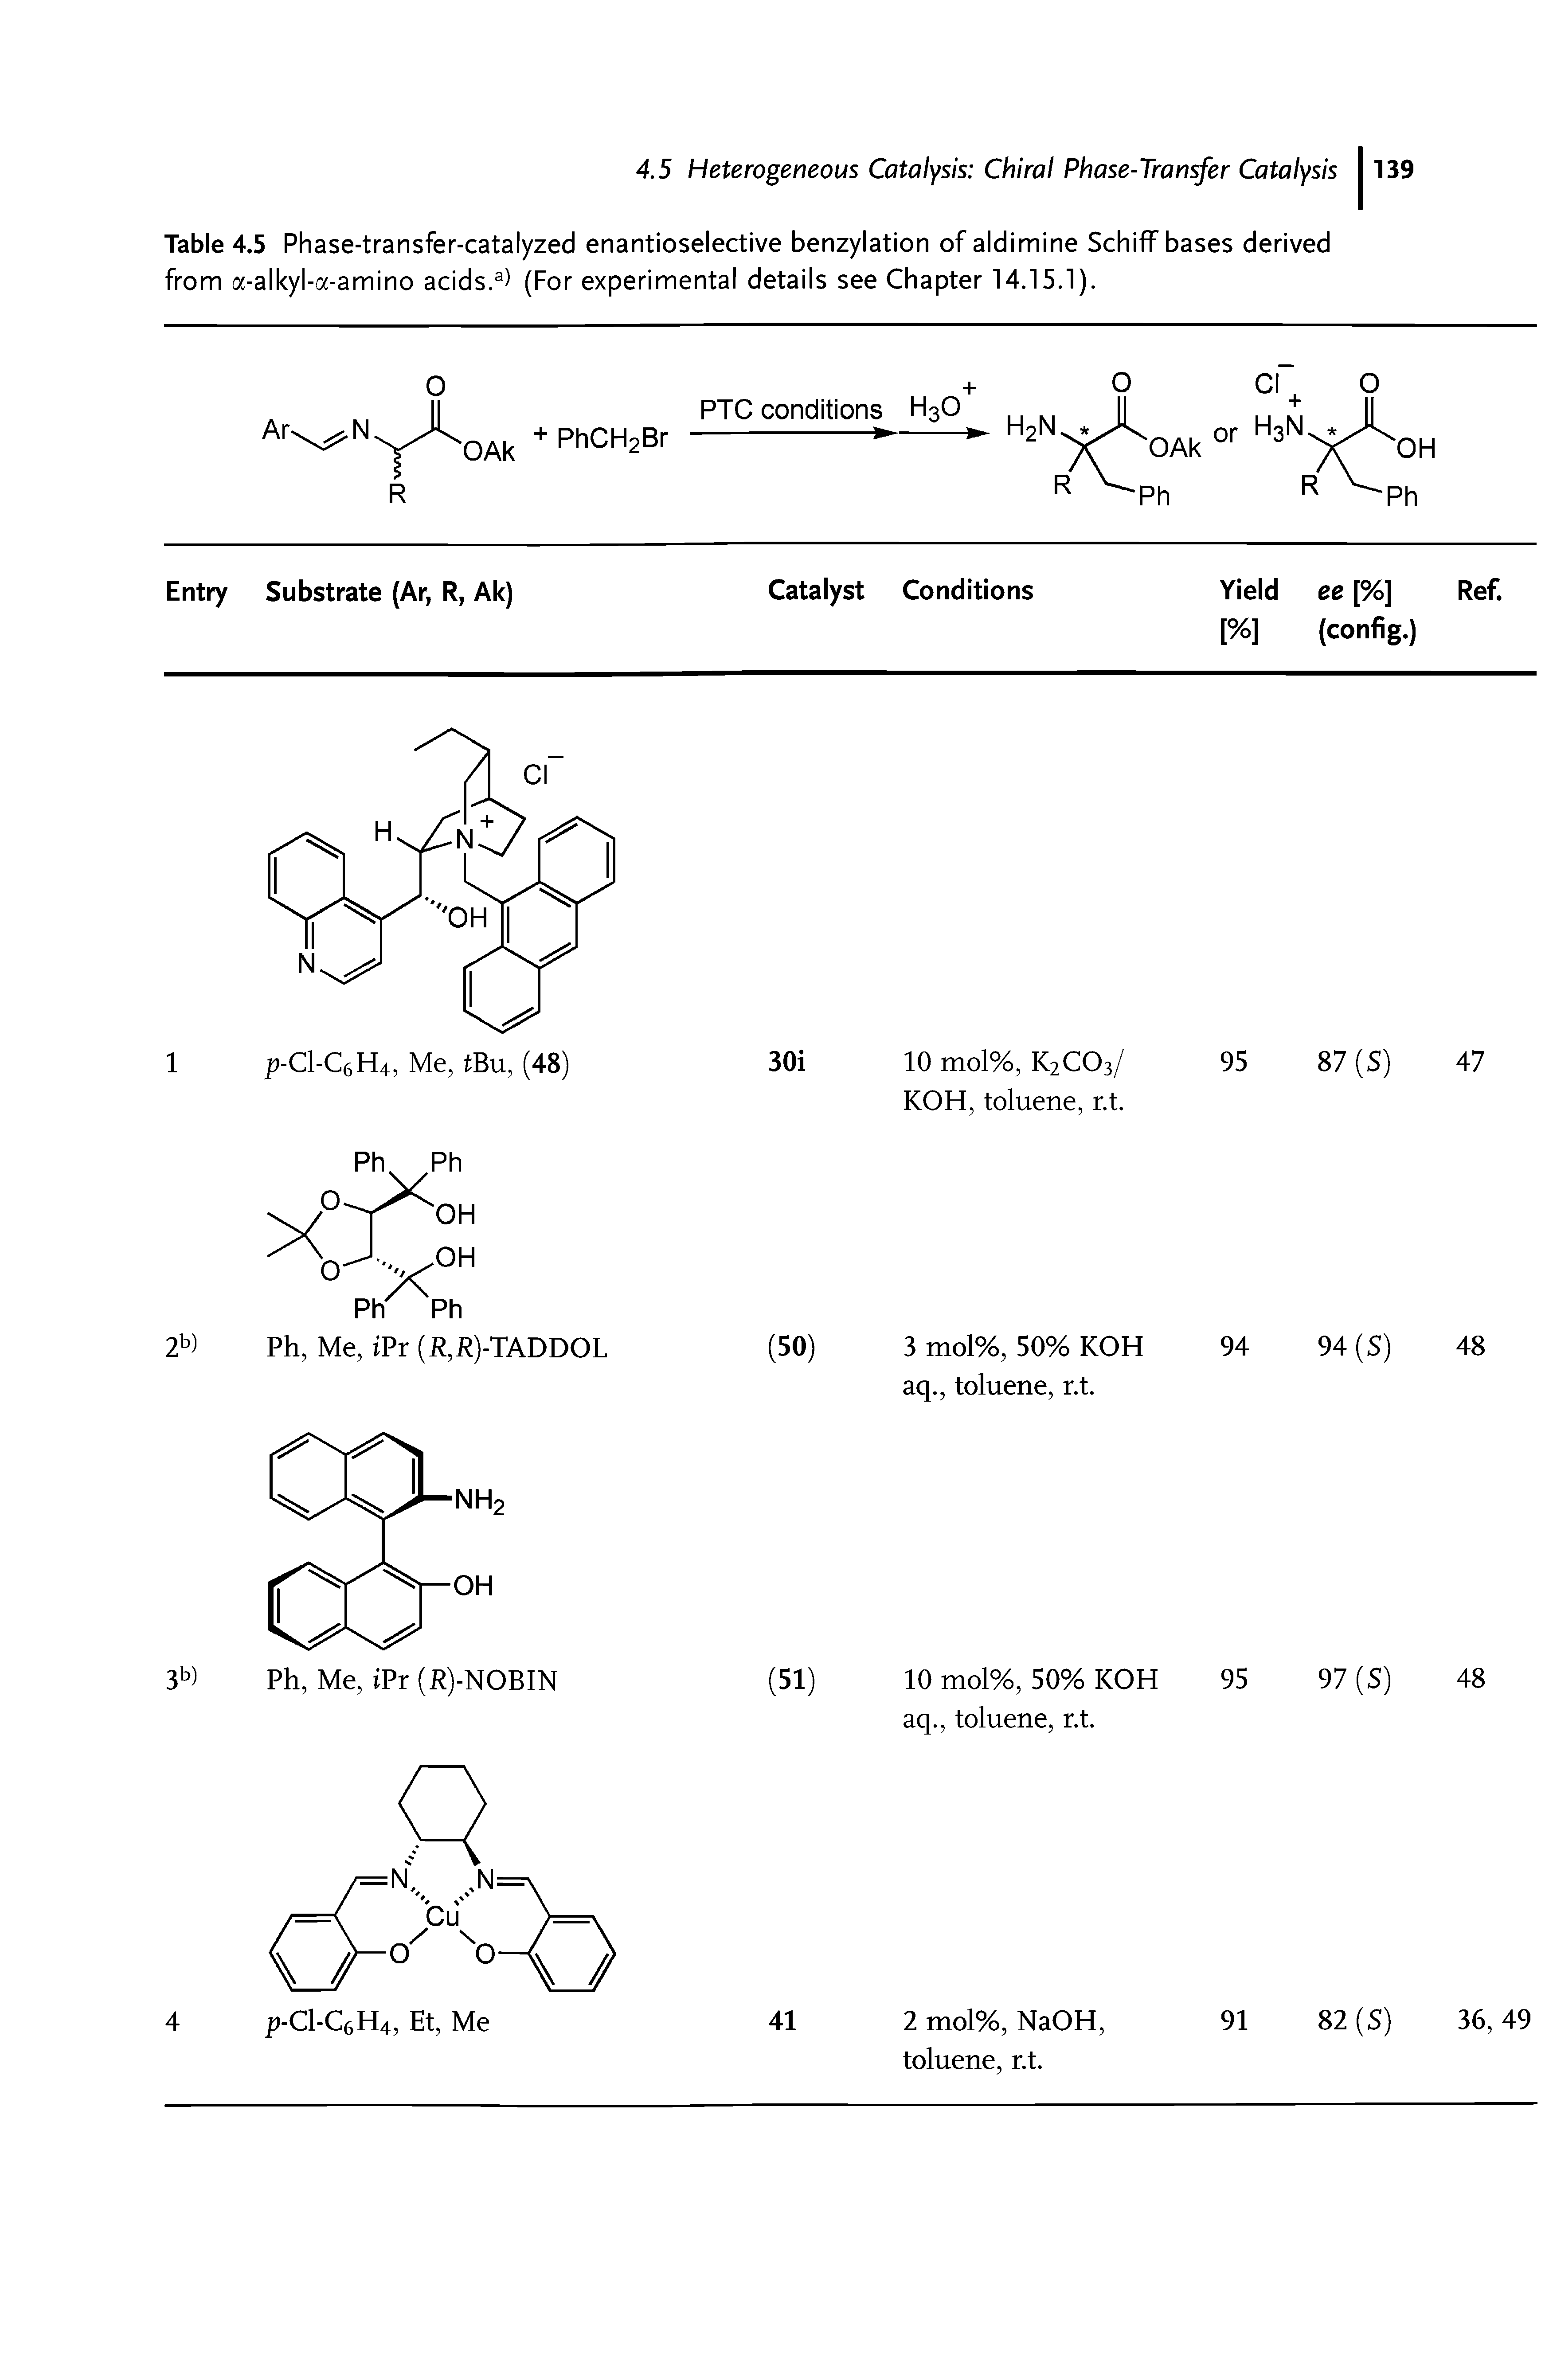 Table 4.5 Phase-transfer-catalyzed enantioselective benzylation of aldimine Schiff bases derived from a-alkyl-a-amino acids.3) (For experimental details see Chapter 14.15.1).